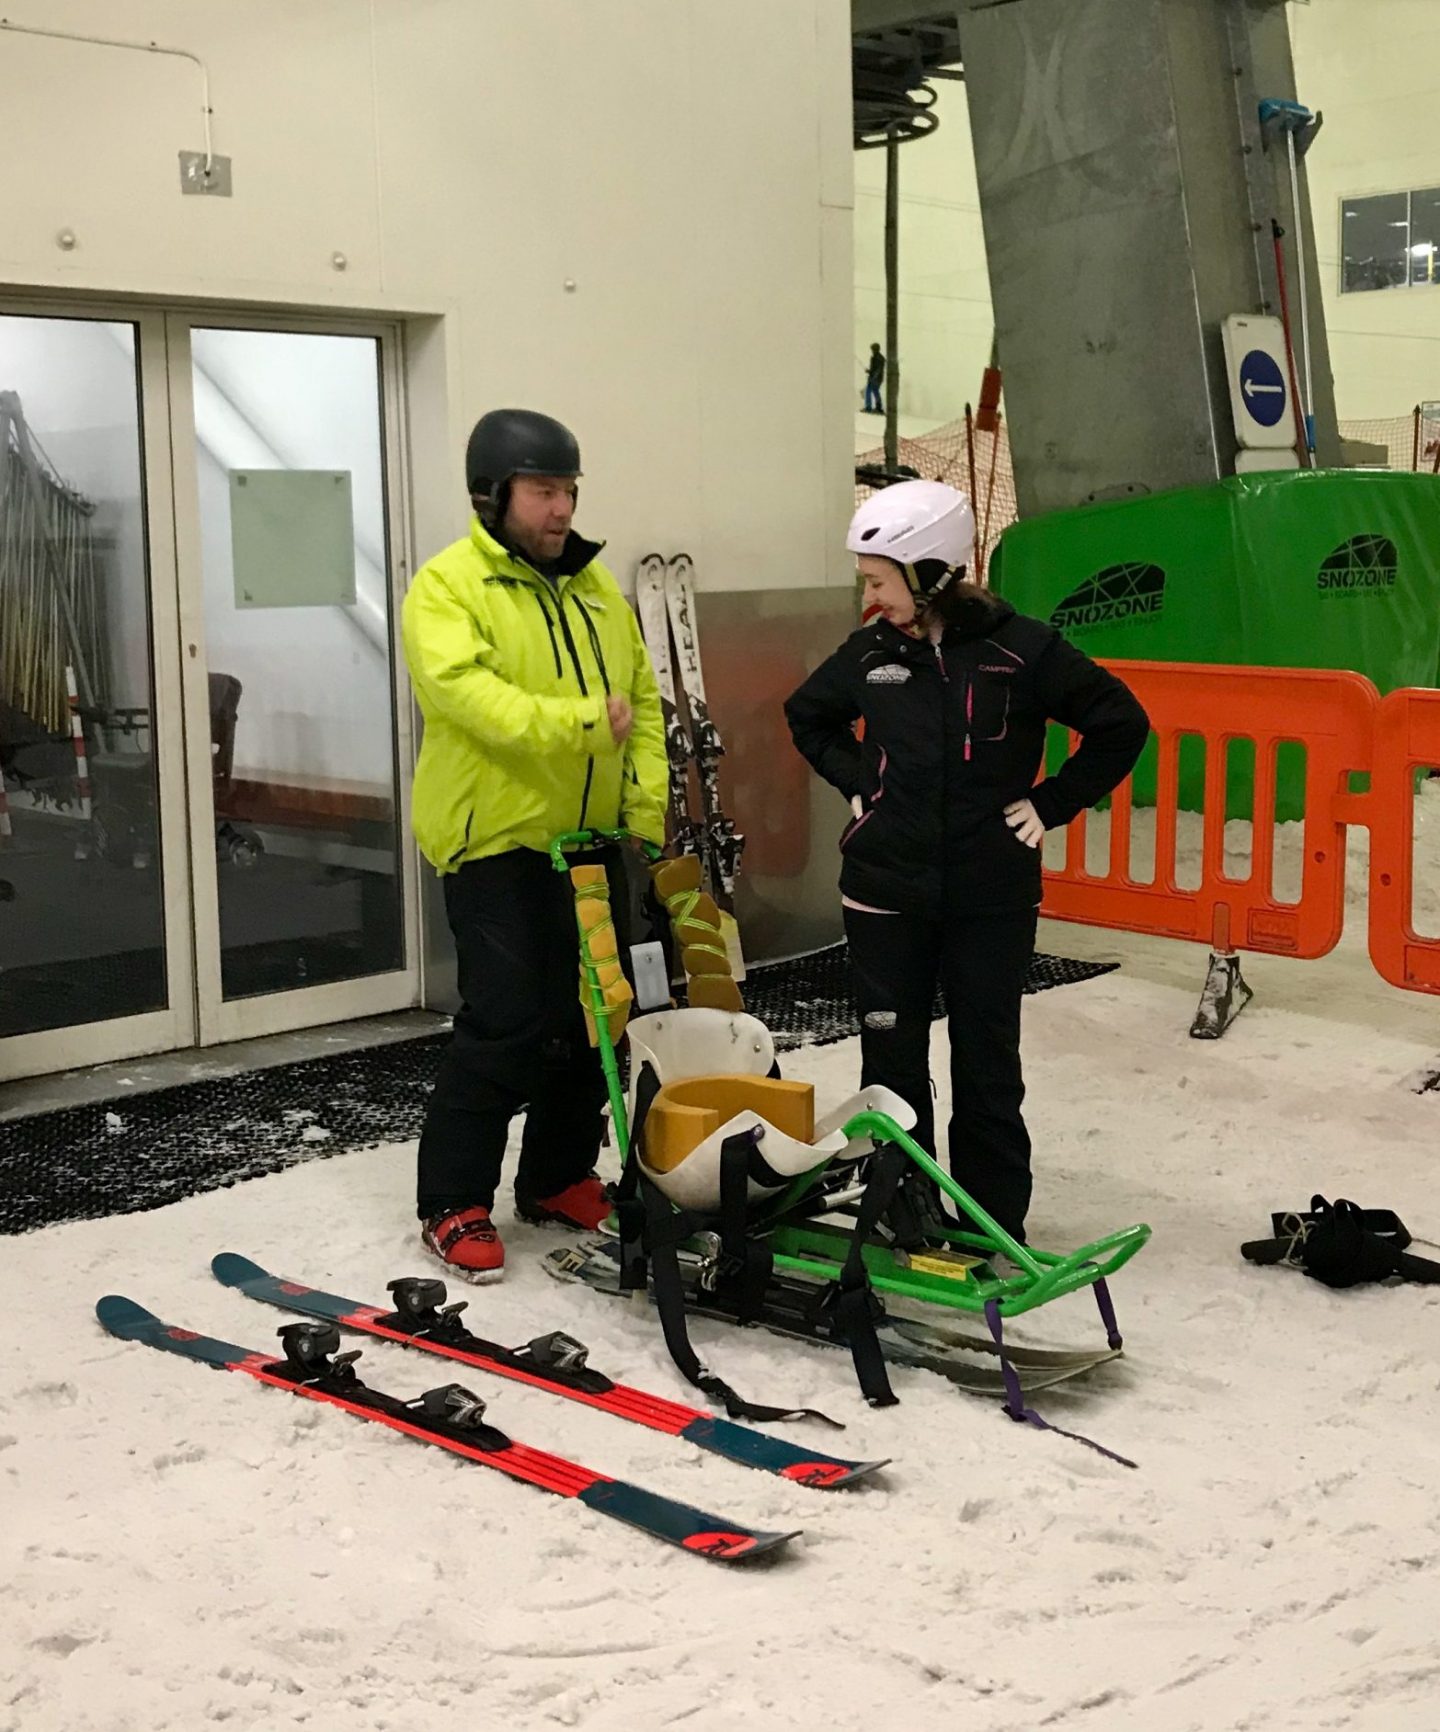 pippa and coach adam standing up and talking on the edge of the slopes, with sit-ski placed in front of them